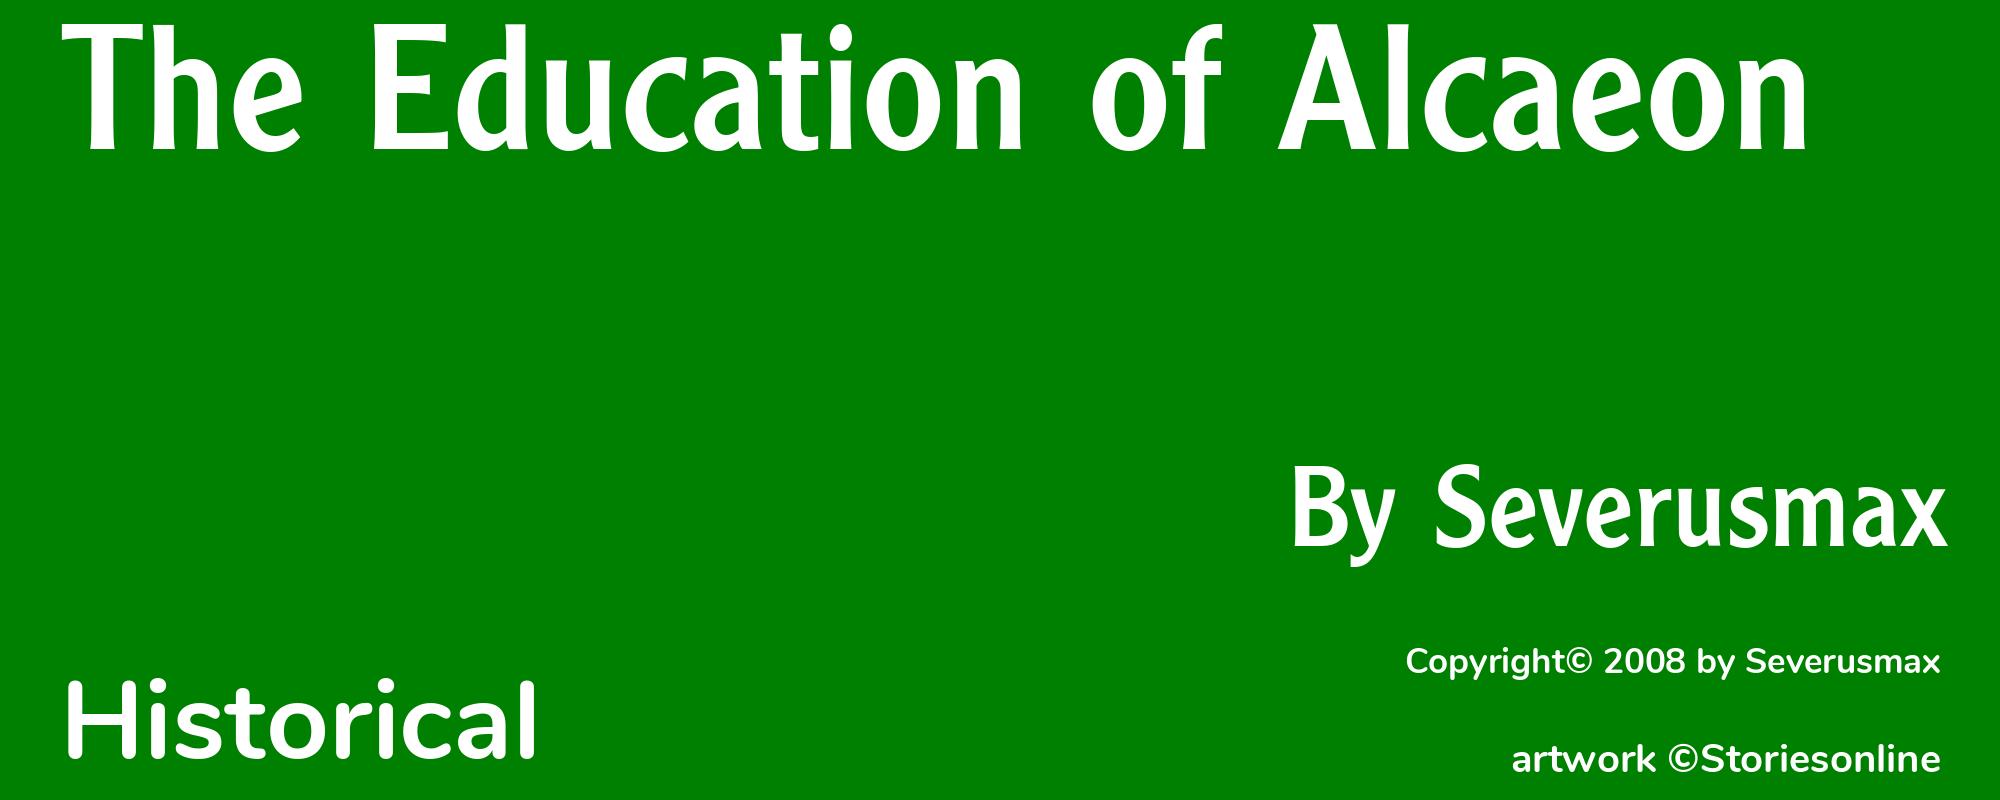 The Education of Alcaeon - Cover